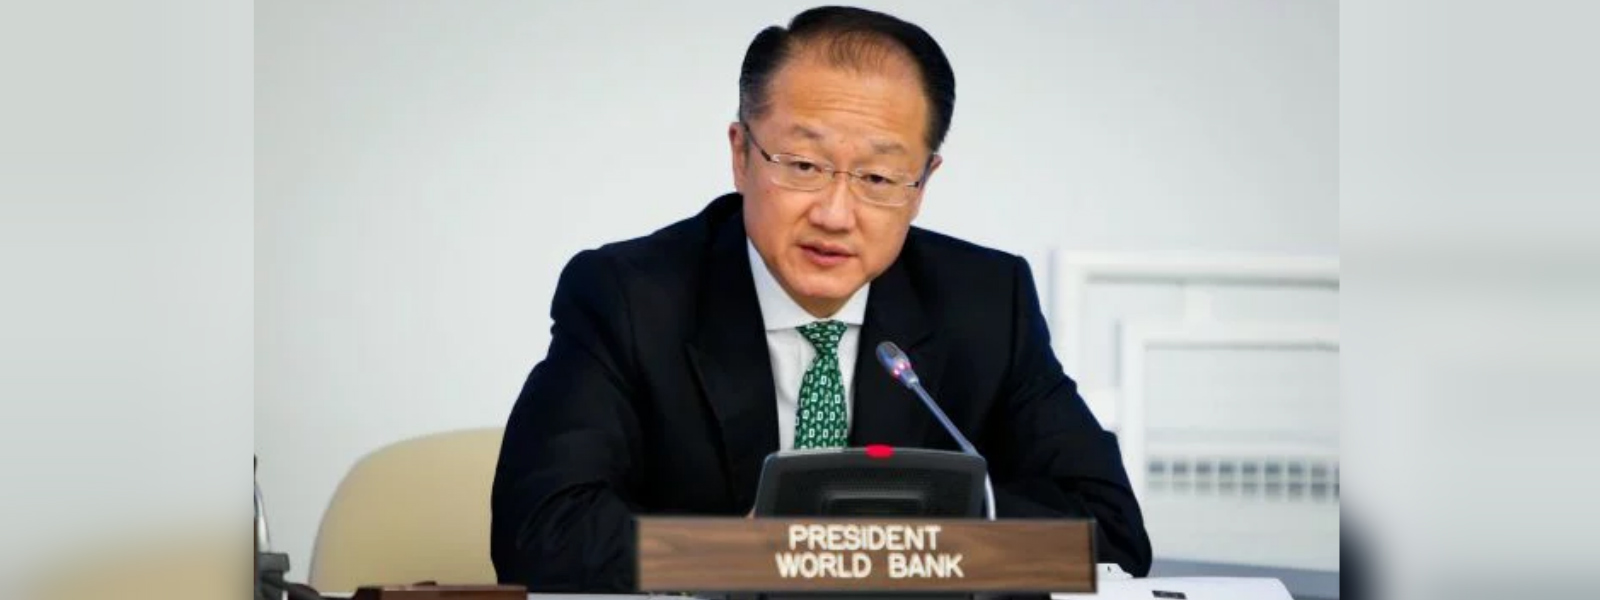 World Bank chief to step down on Feb. 1